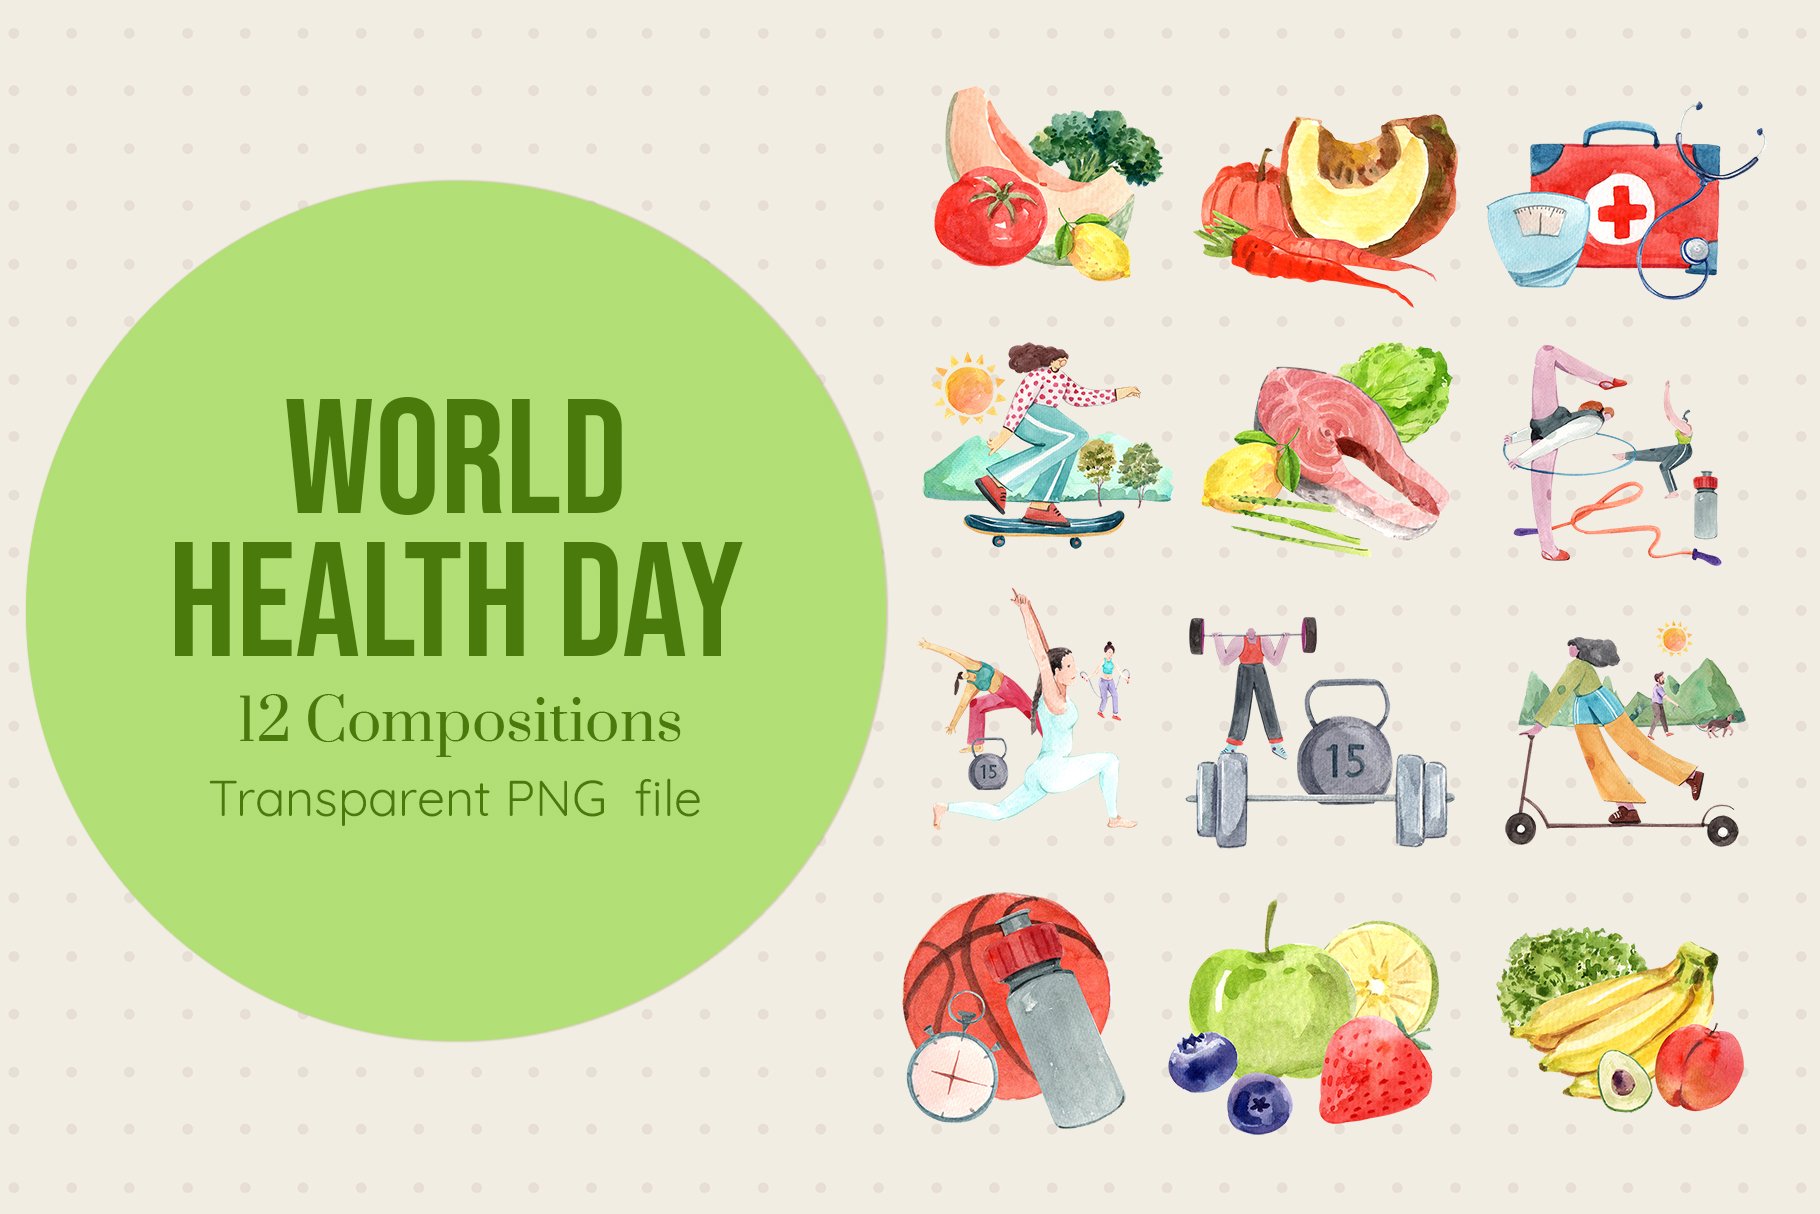 World health day presentation elements for full composition.